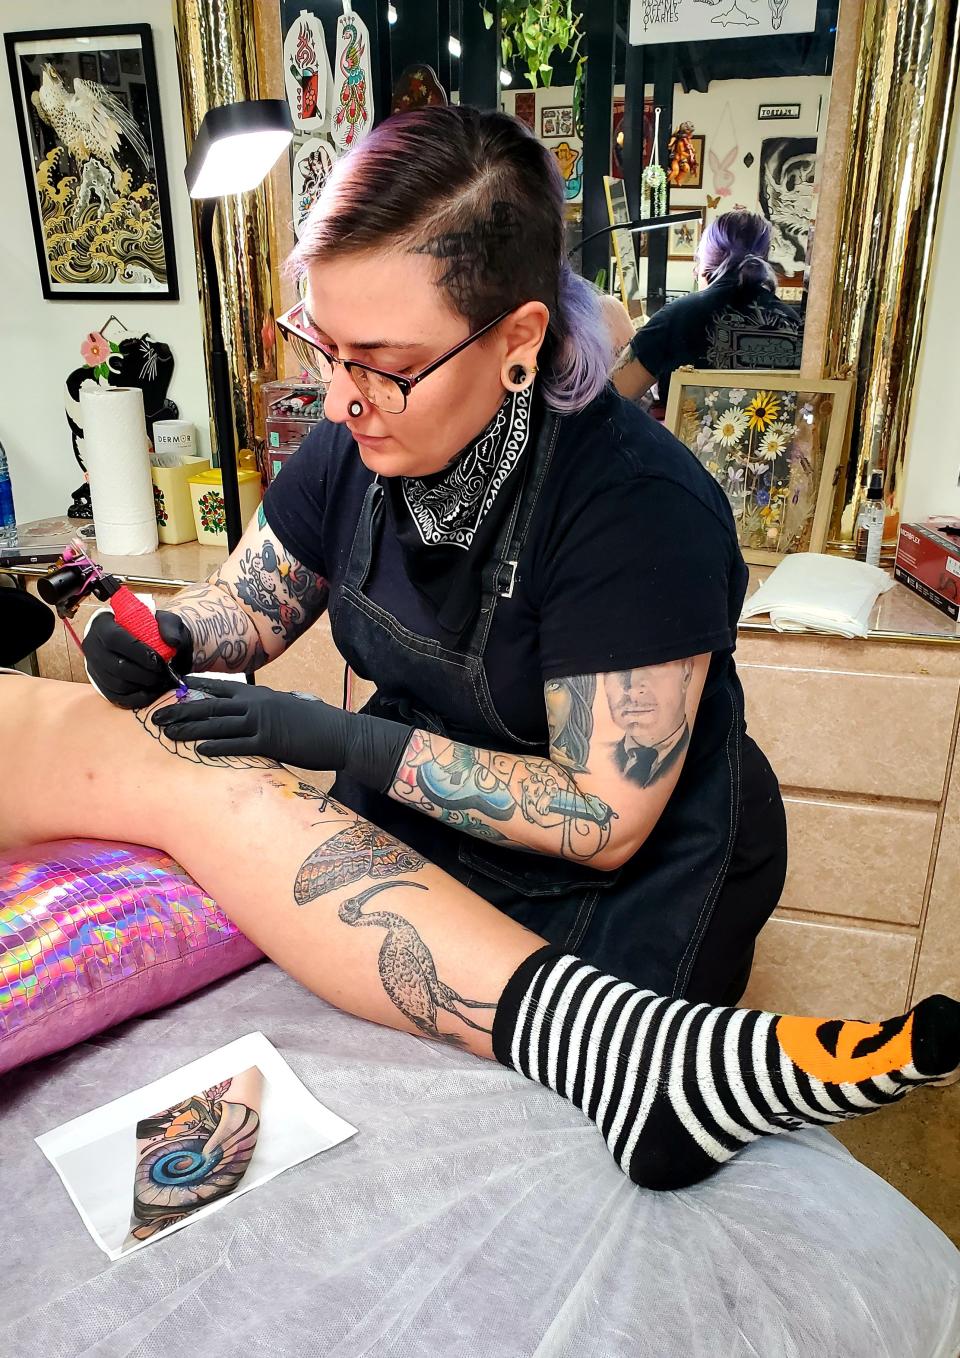 At Lady Magnolia Tattoo in Dallas, Texas, artist Andrea Patterson, 31, colors in an image of an ammonite for patron Kate Pelusio, 34, on Friday, July 1, 2022. Patterson planned to take part in the shop's pro-abortion flash sale later in the month to benefit abortion rights advocacy organizations.